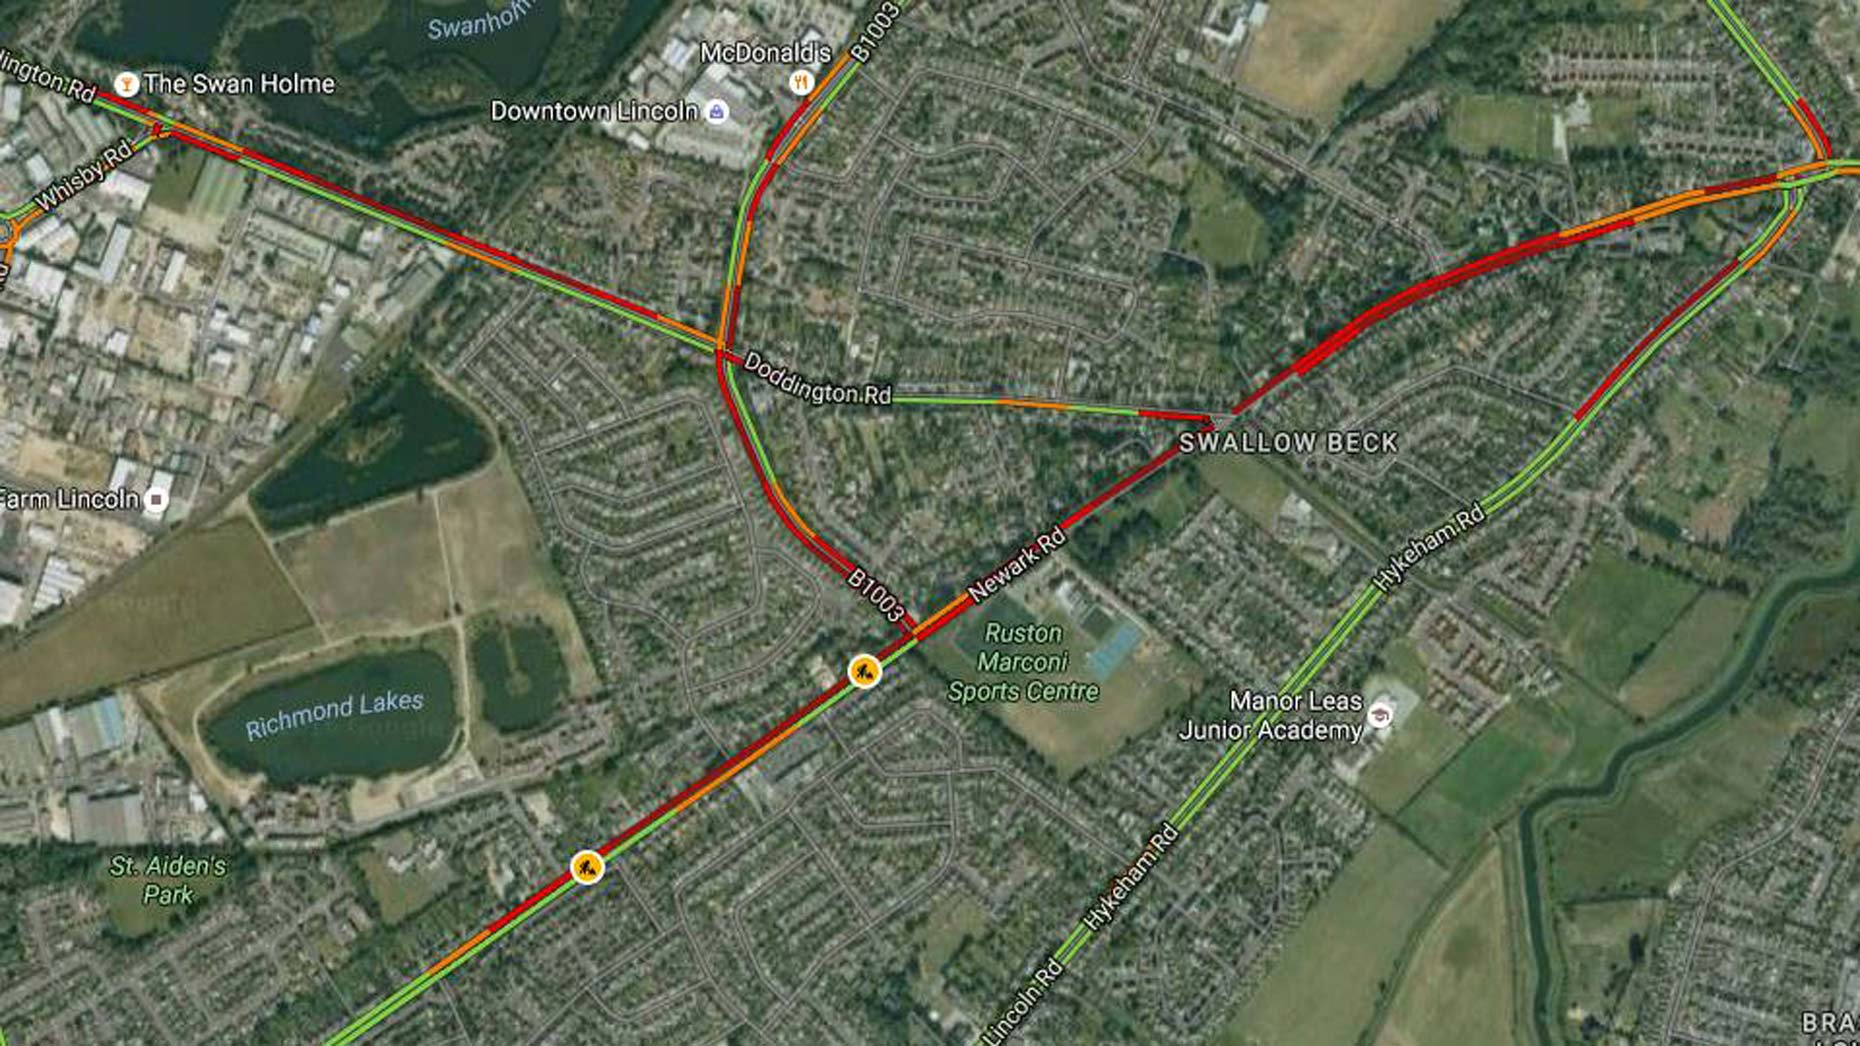 The road closure is affecting traffic on Newark Road. Photo: Google Maps